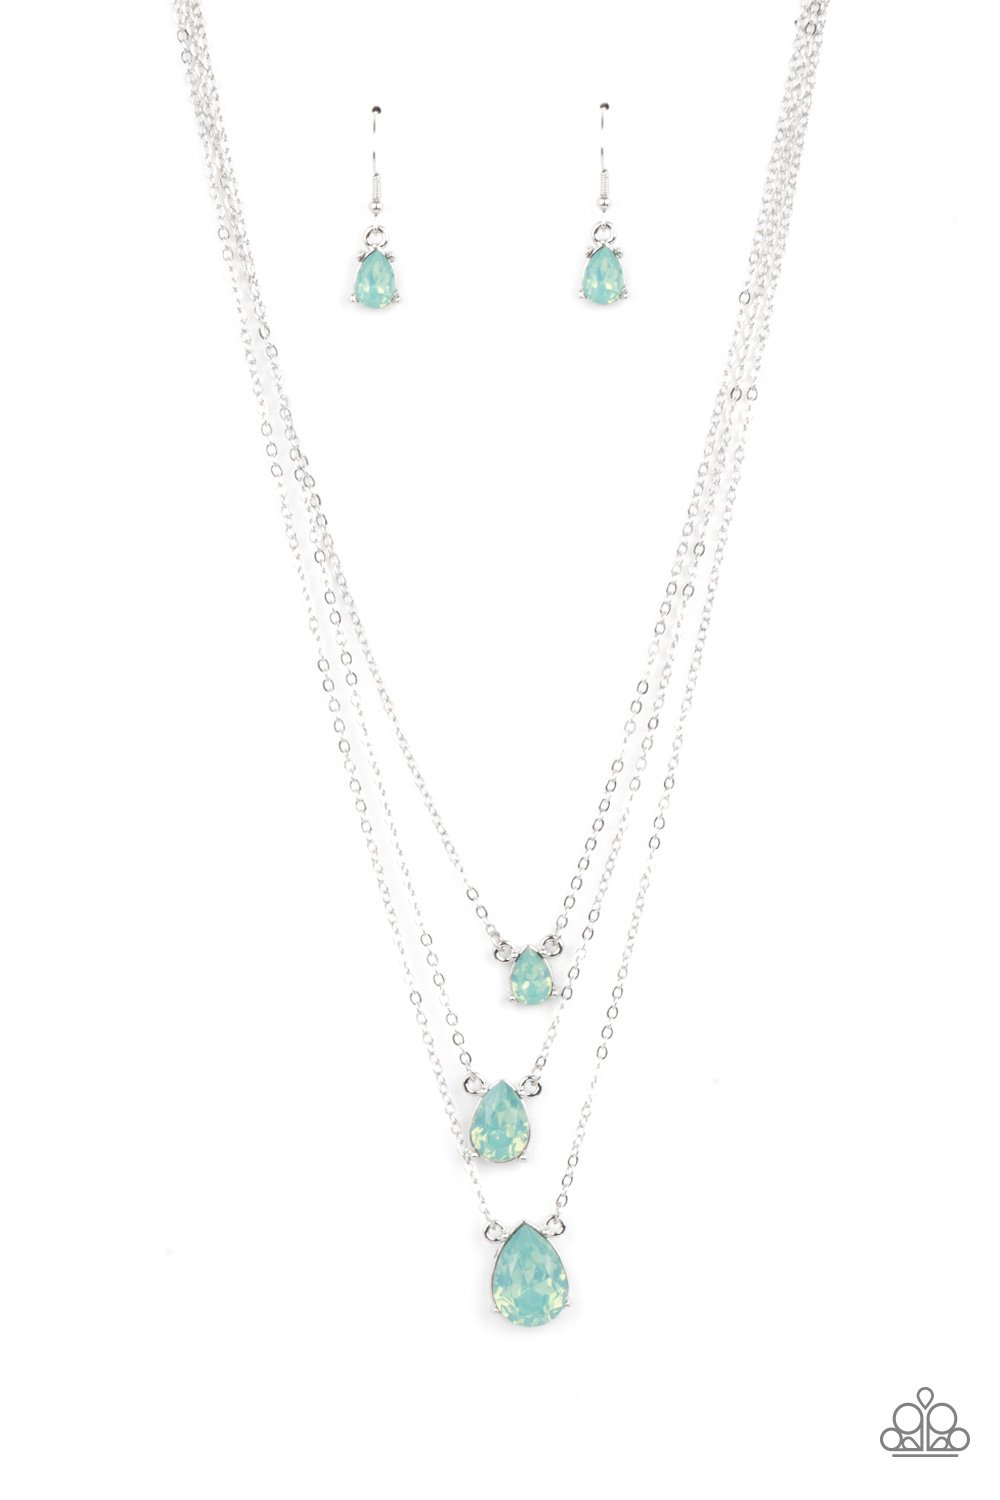 Necklace - Dewy Drizzle - Green